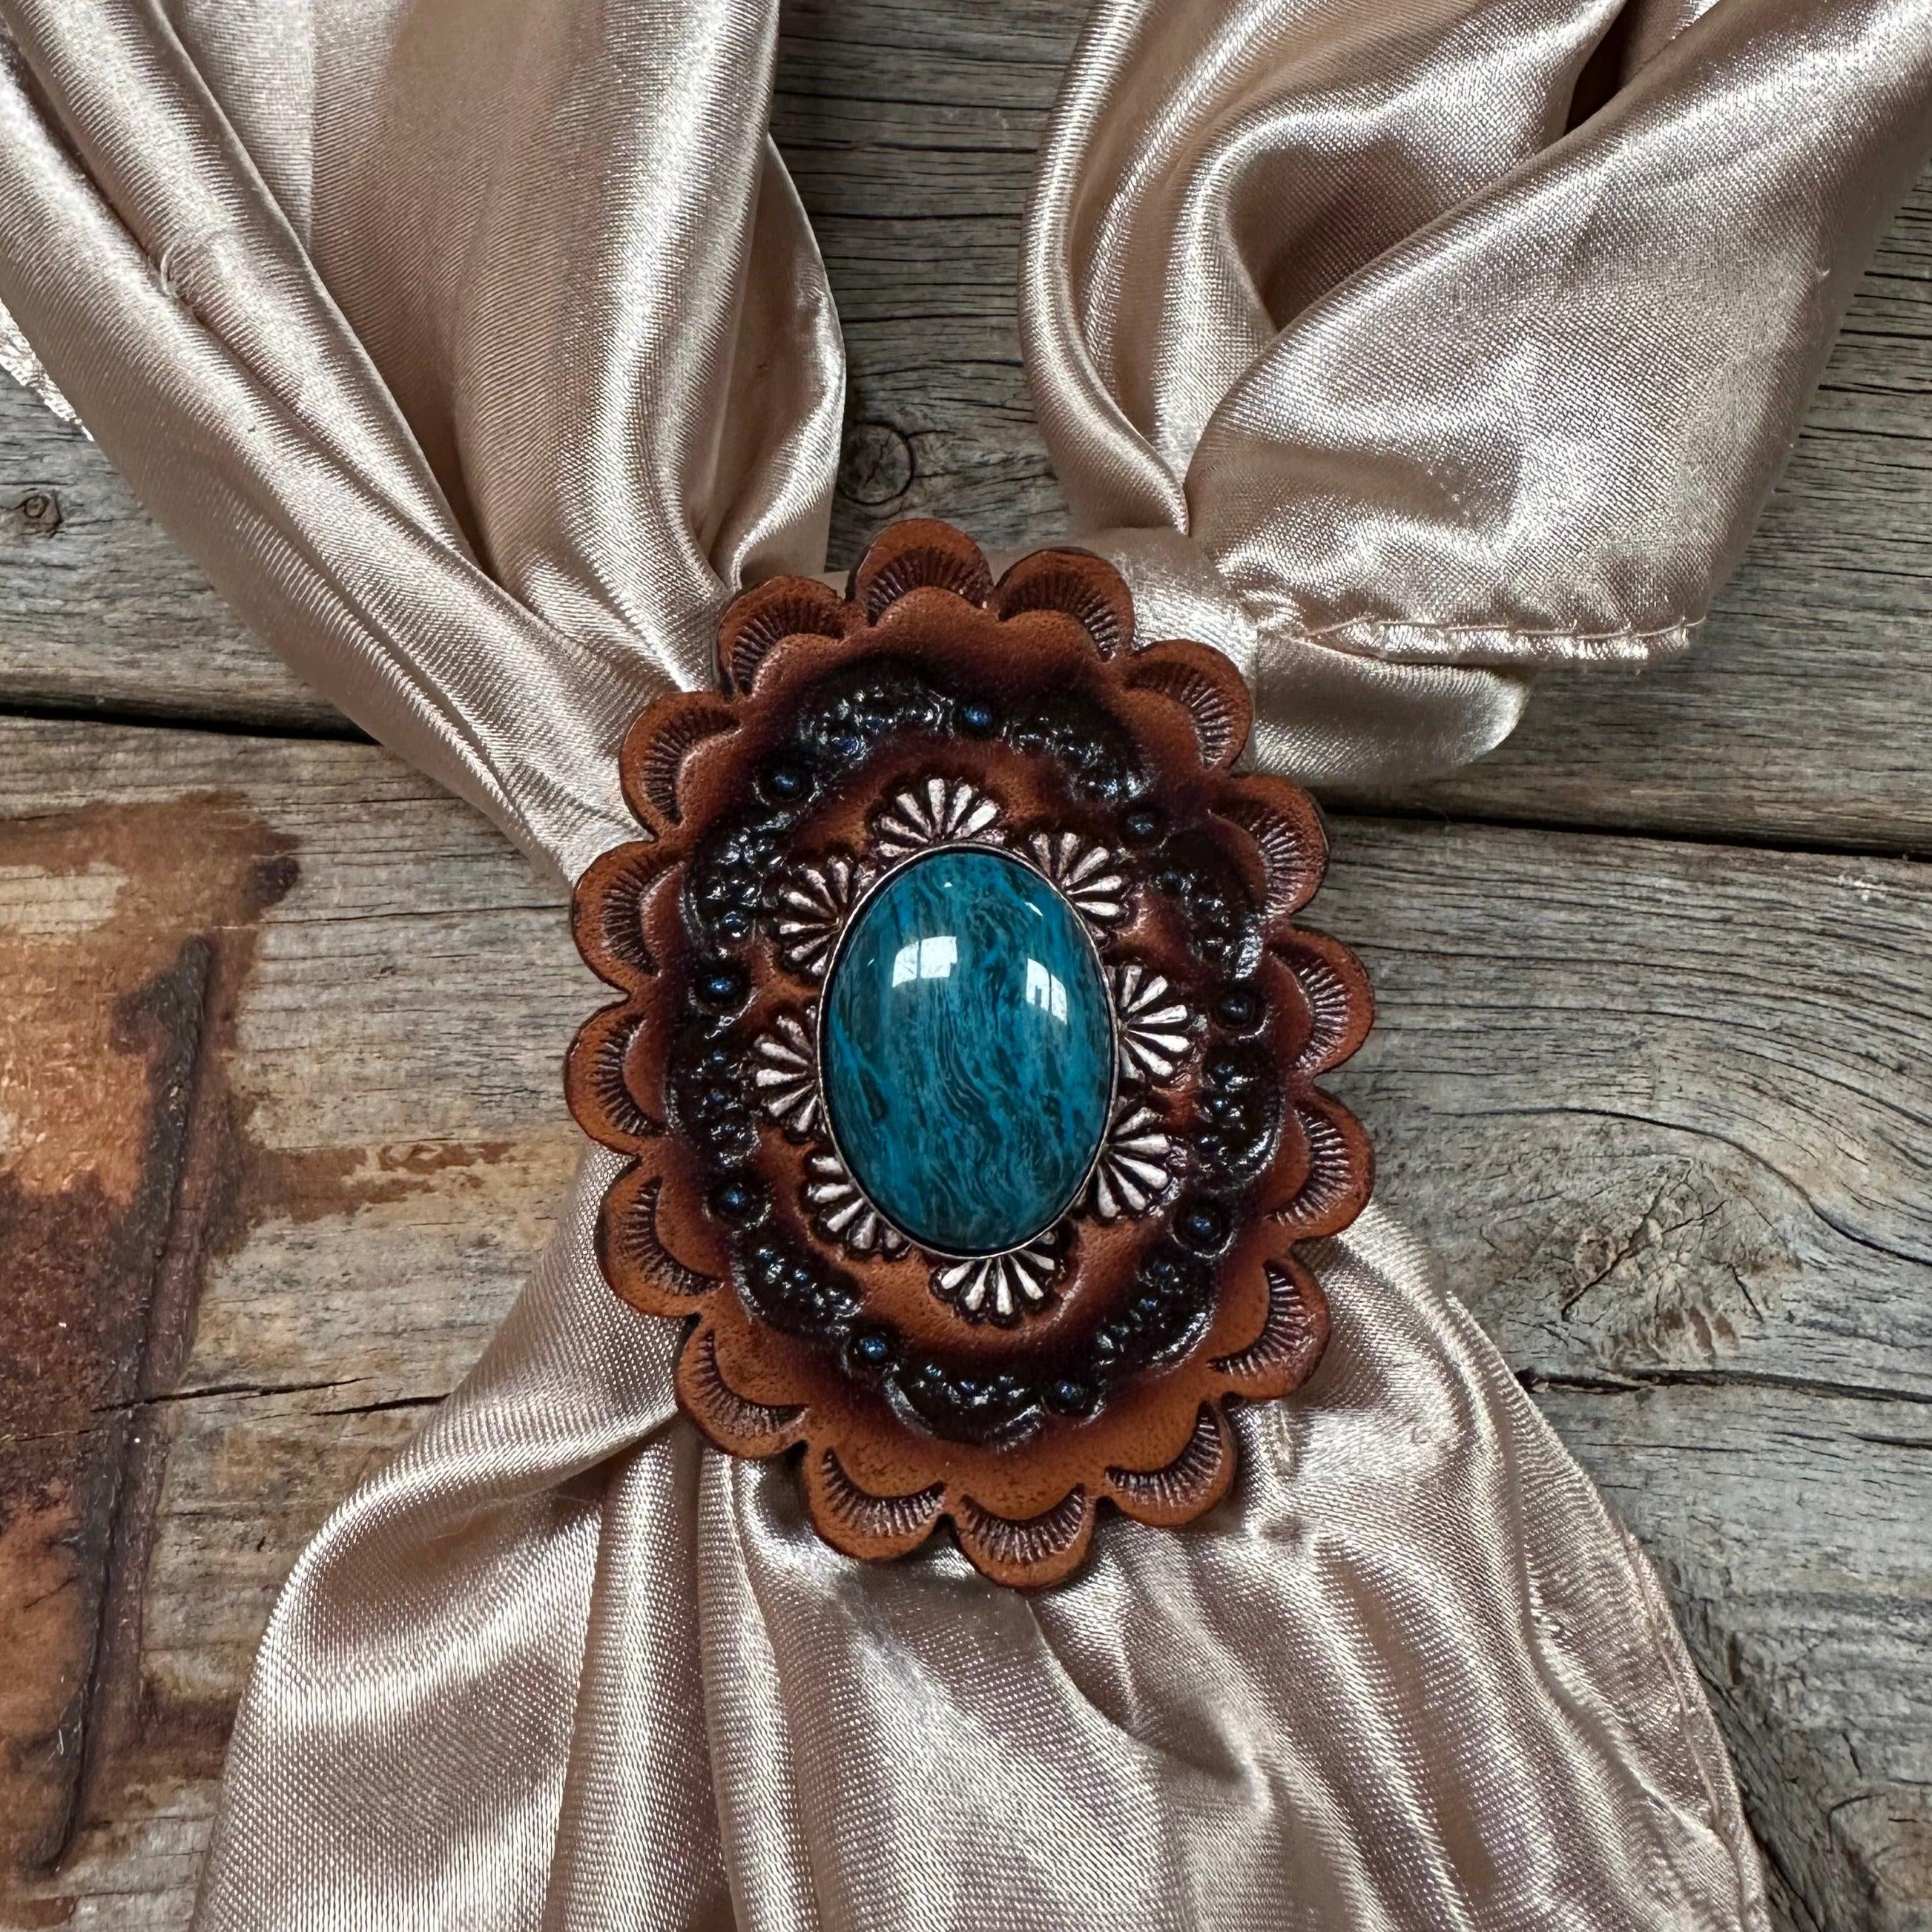 Leather Rosette with Blue Cabochon Wild Rag Slide #WRSR102BL - RODEO DRIVE